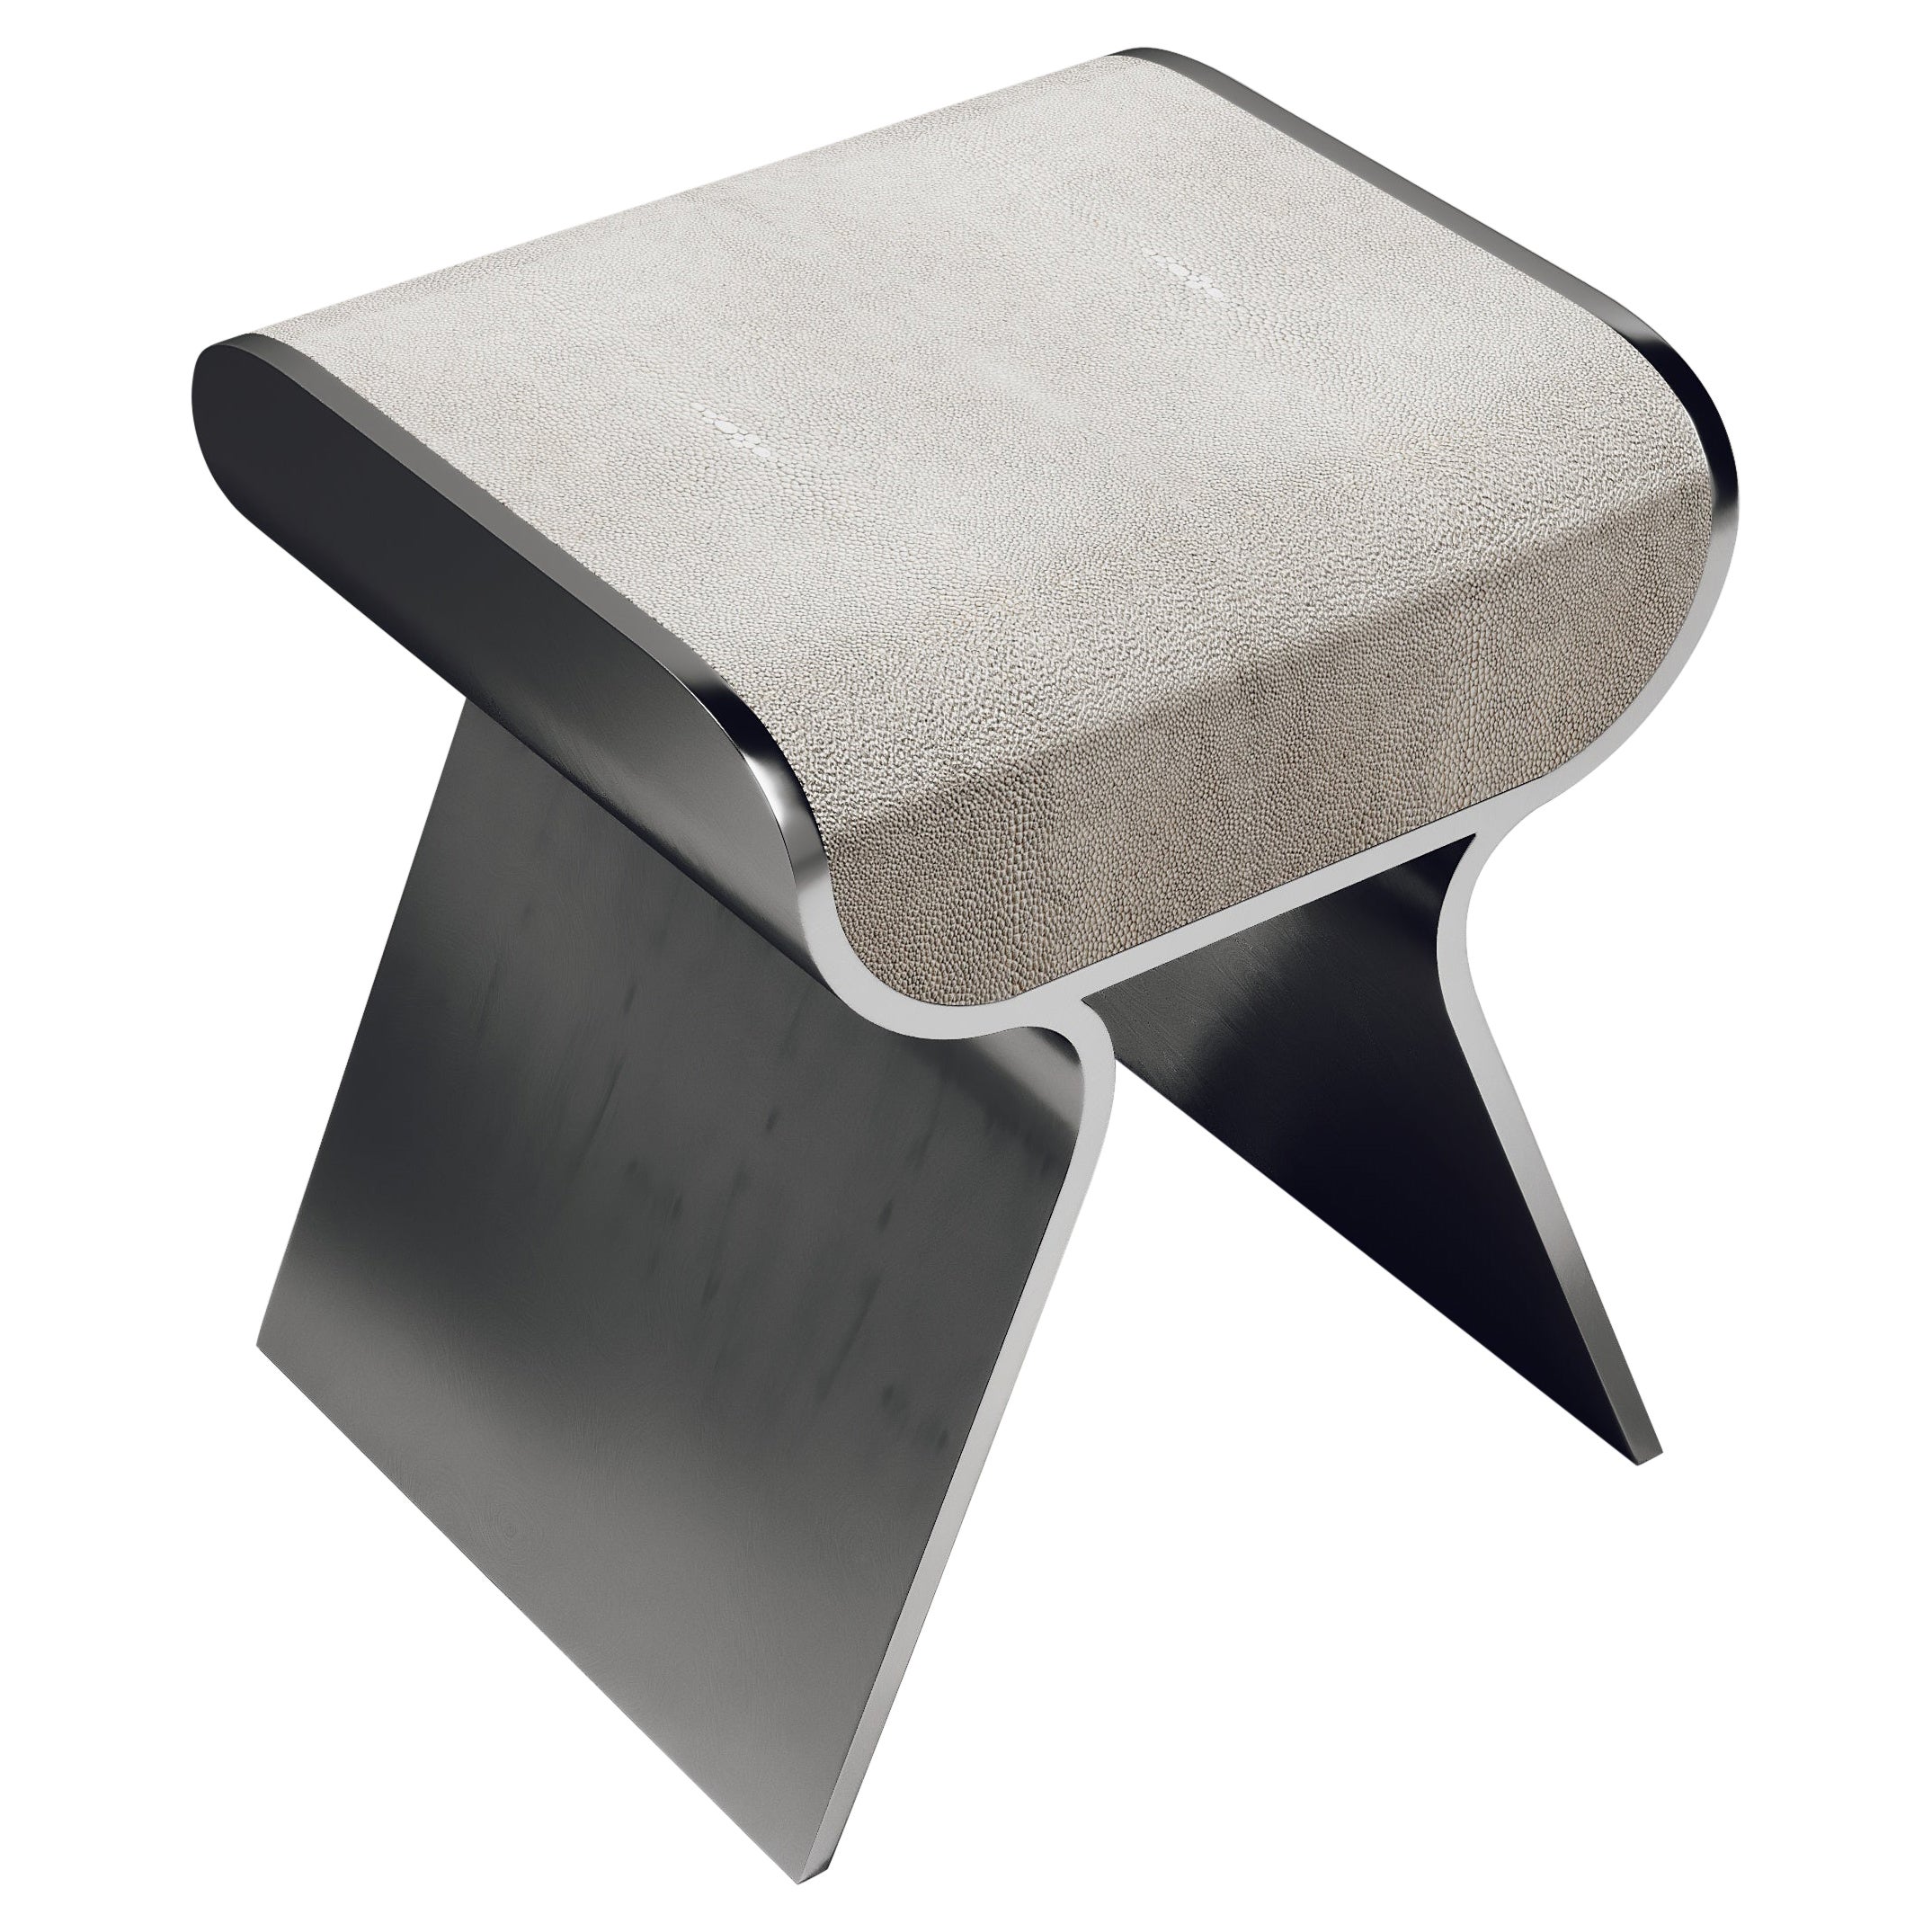 Shagreen Stool with Polished Steel Accents by Kifu Paris